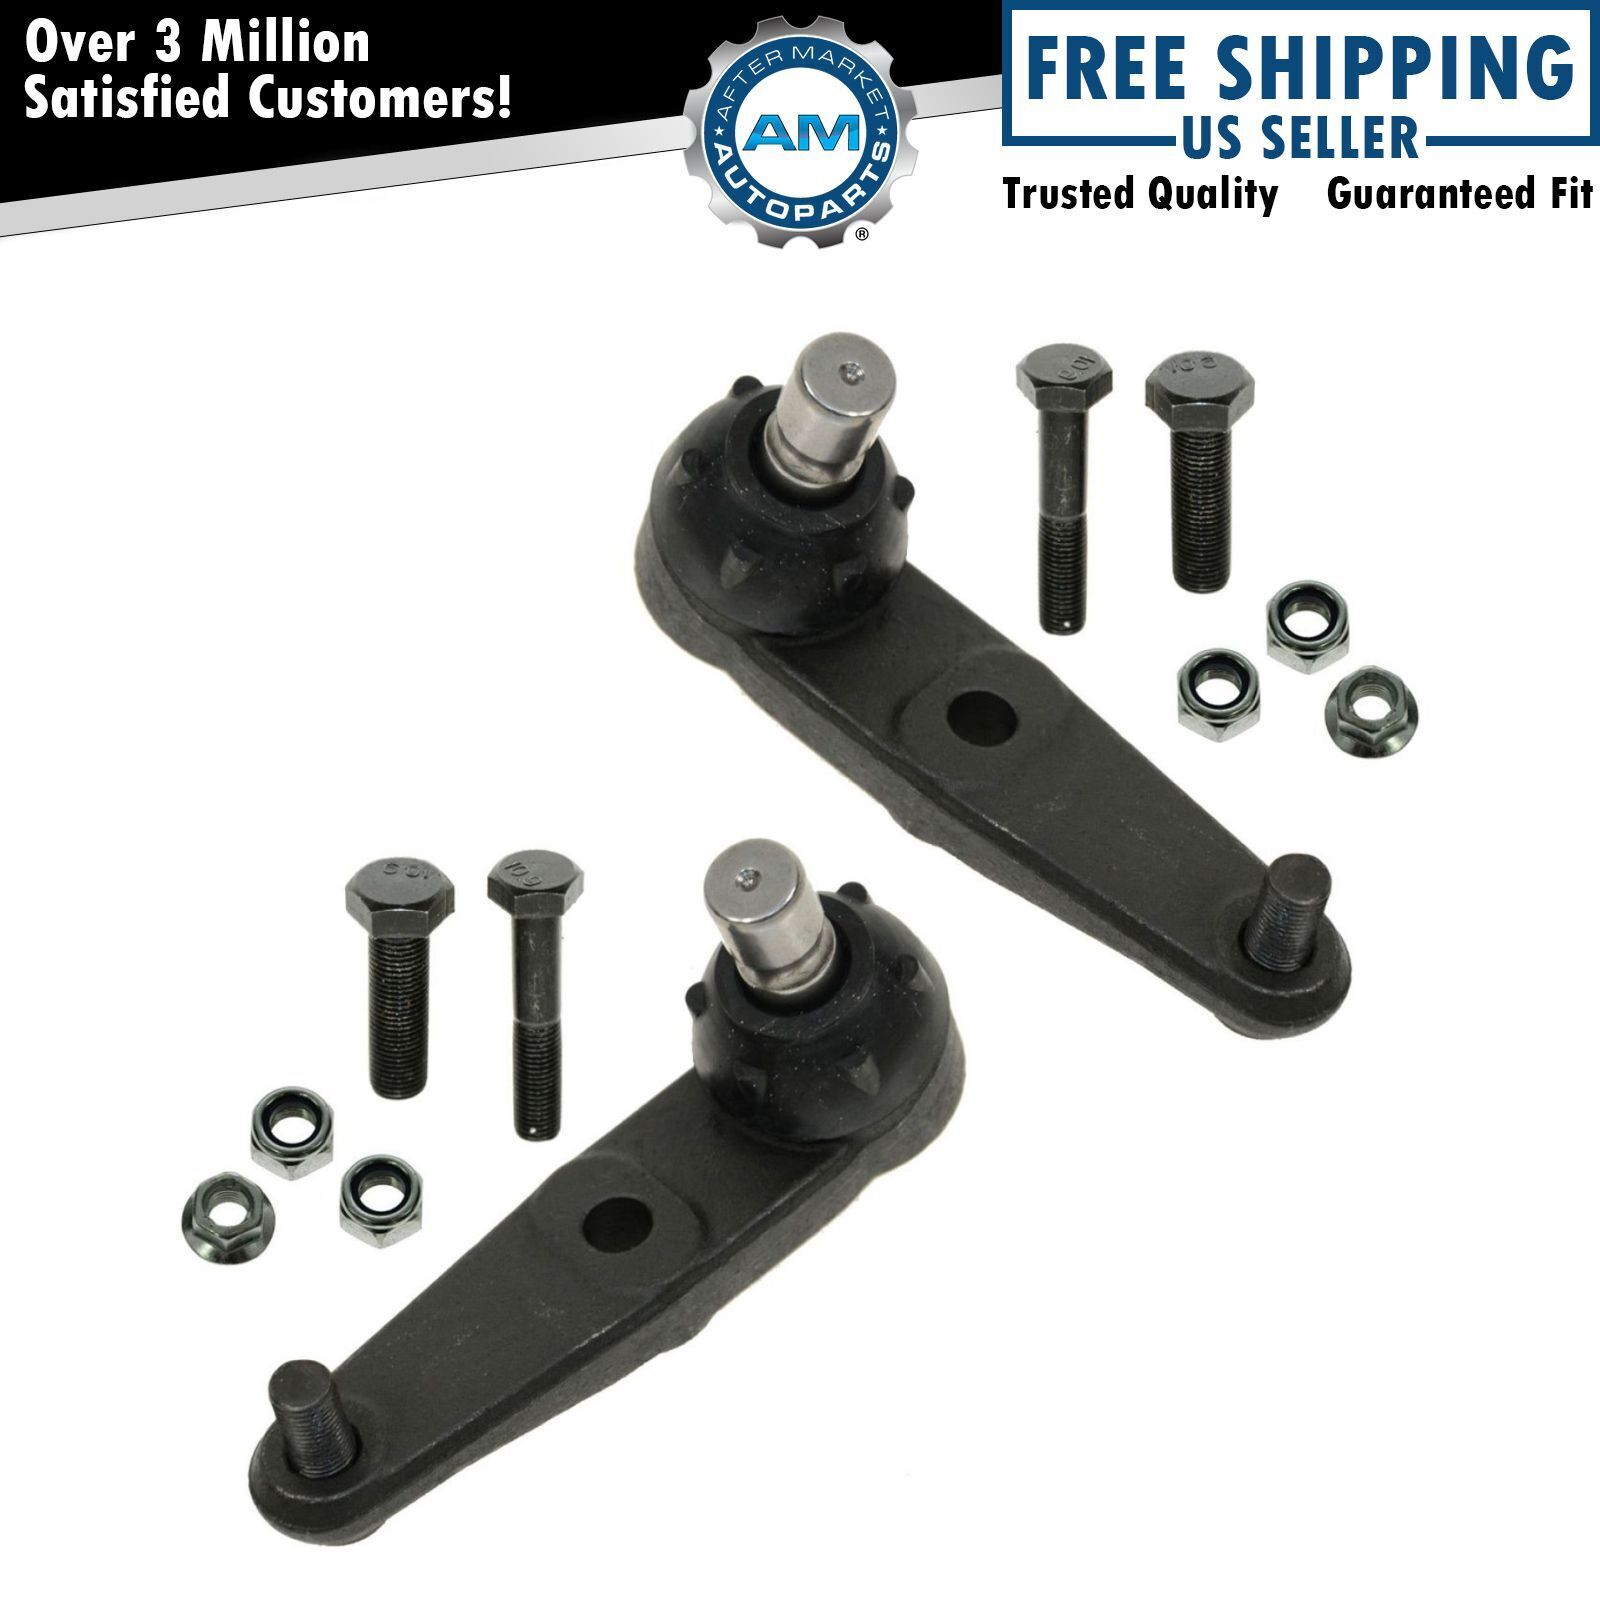 2 Front Lower Ball Joints Pair Set Of 2 Left & Right LH RH For Escort Protege